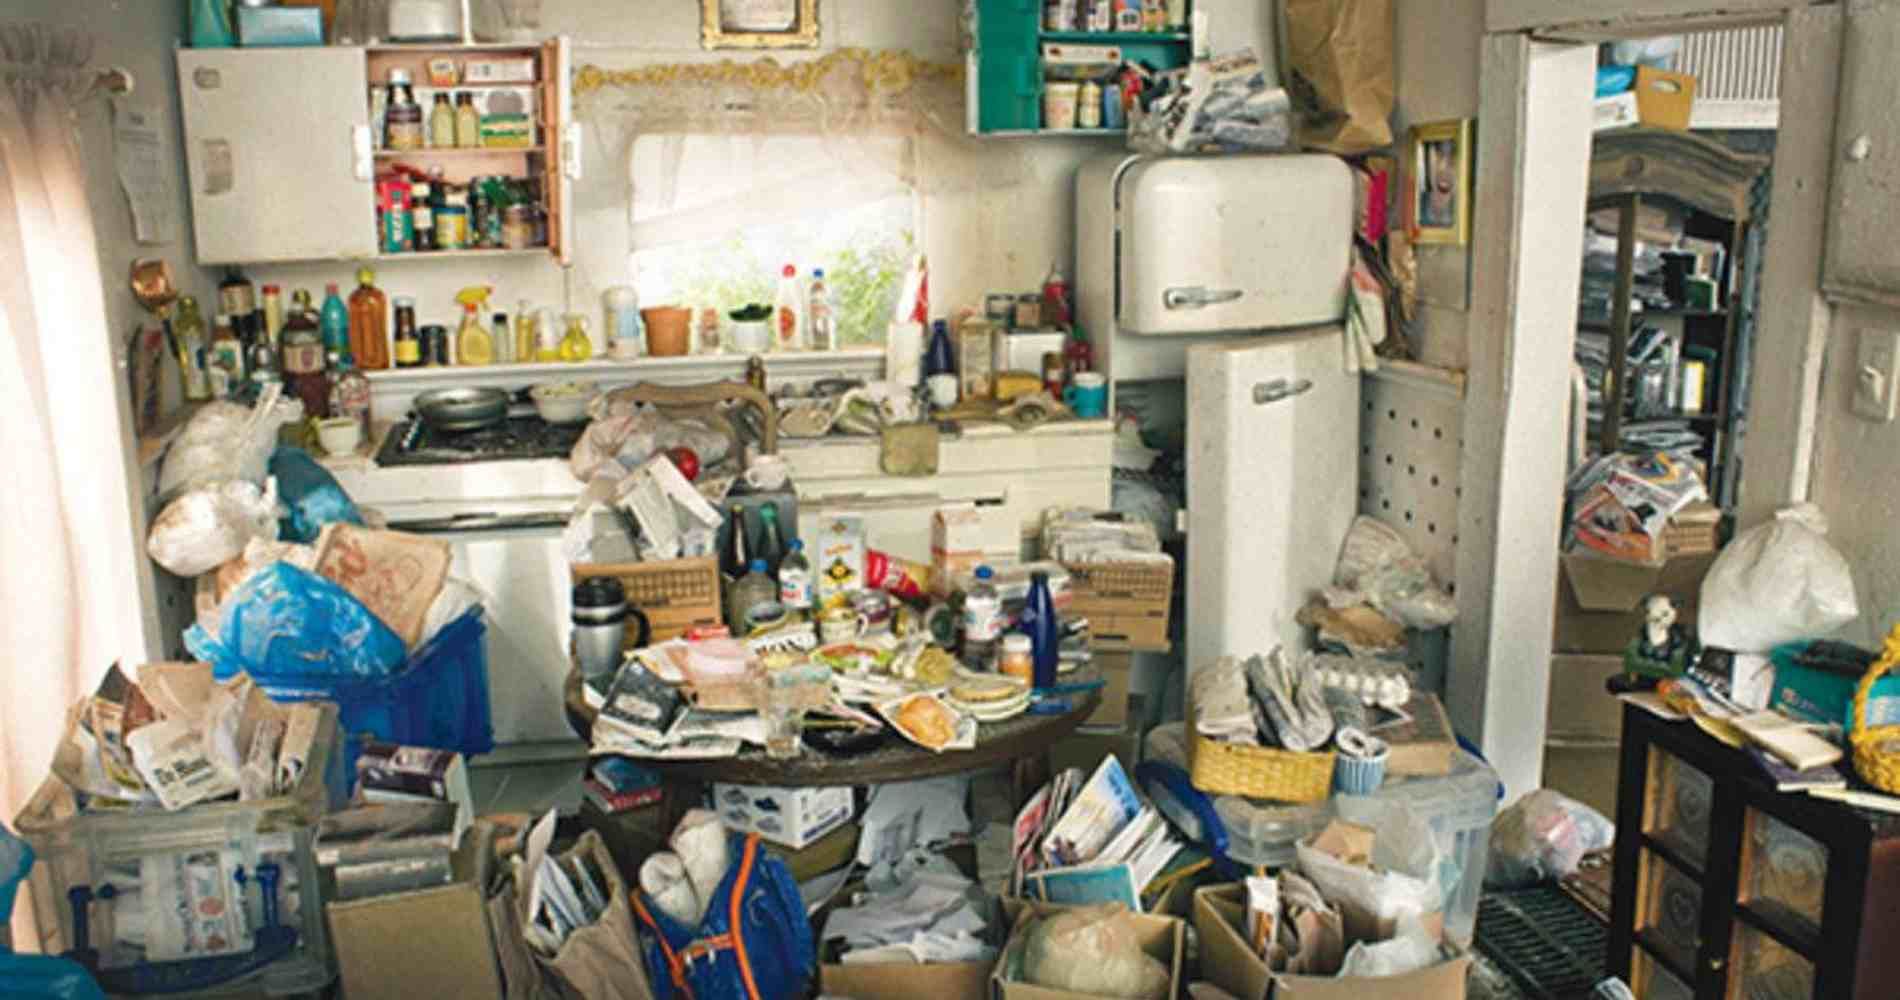 #1 for Hoarding Cleanup in Tolleson, AZ with Over 1200 5-Star Reviews!